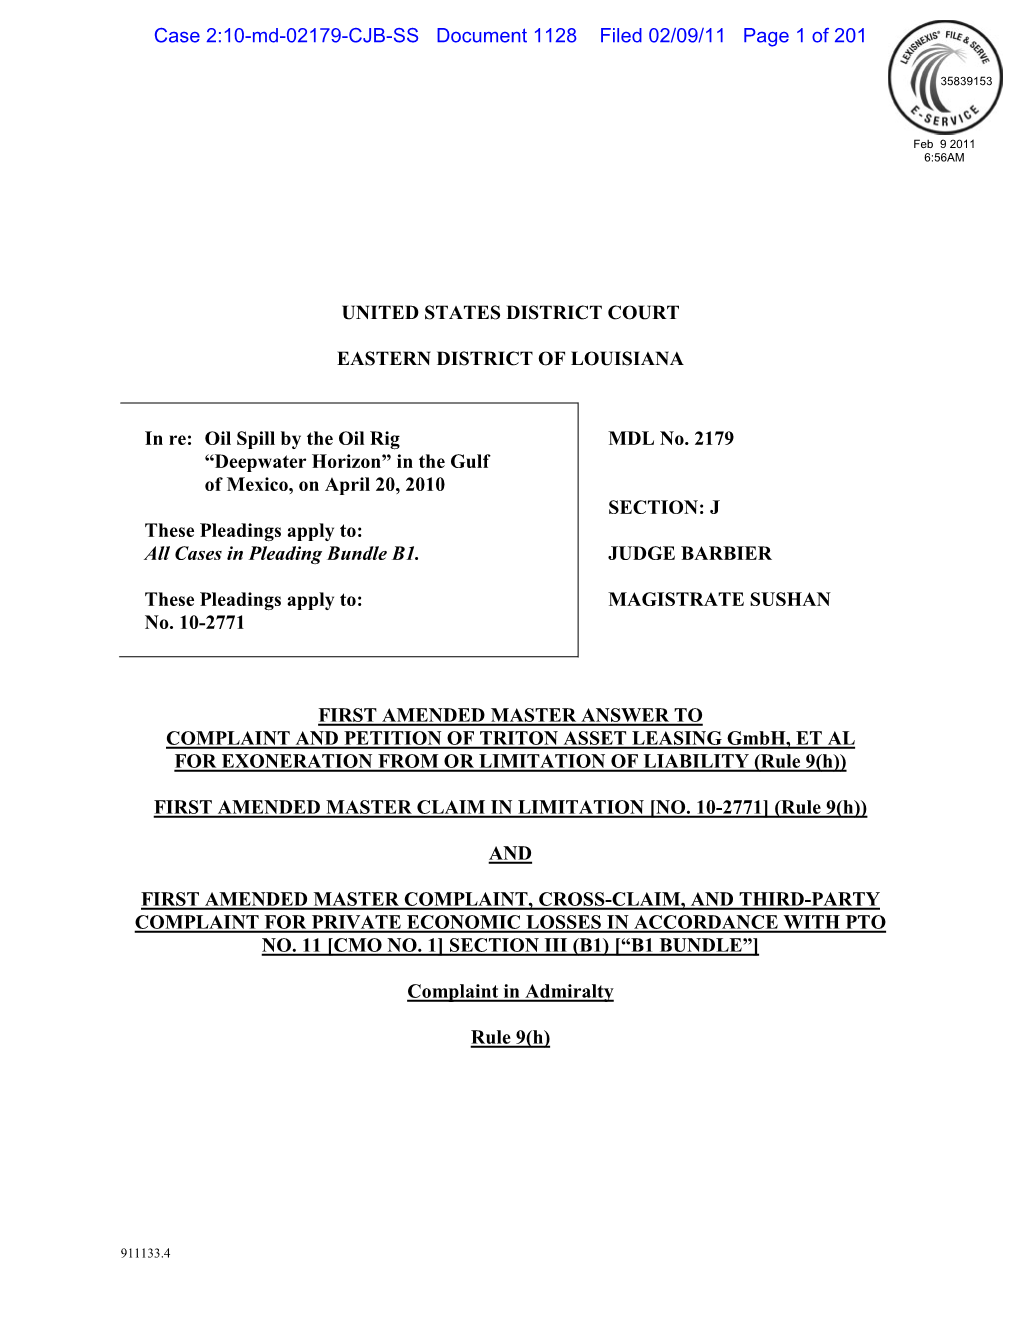 First Amended Master Complaint (B1 Bundle)